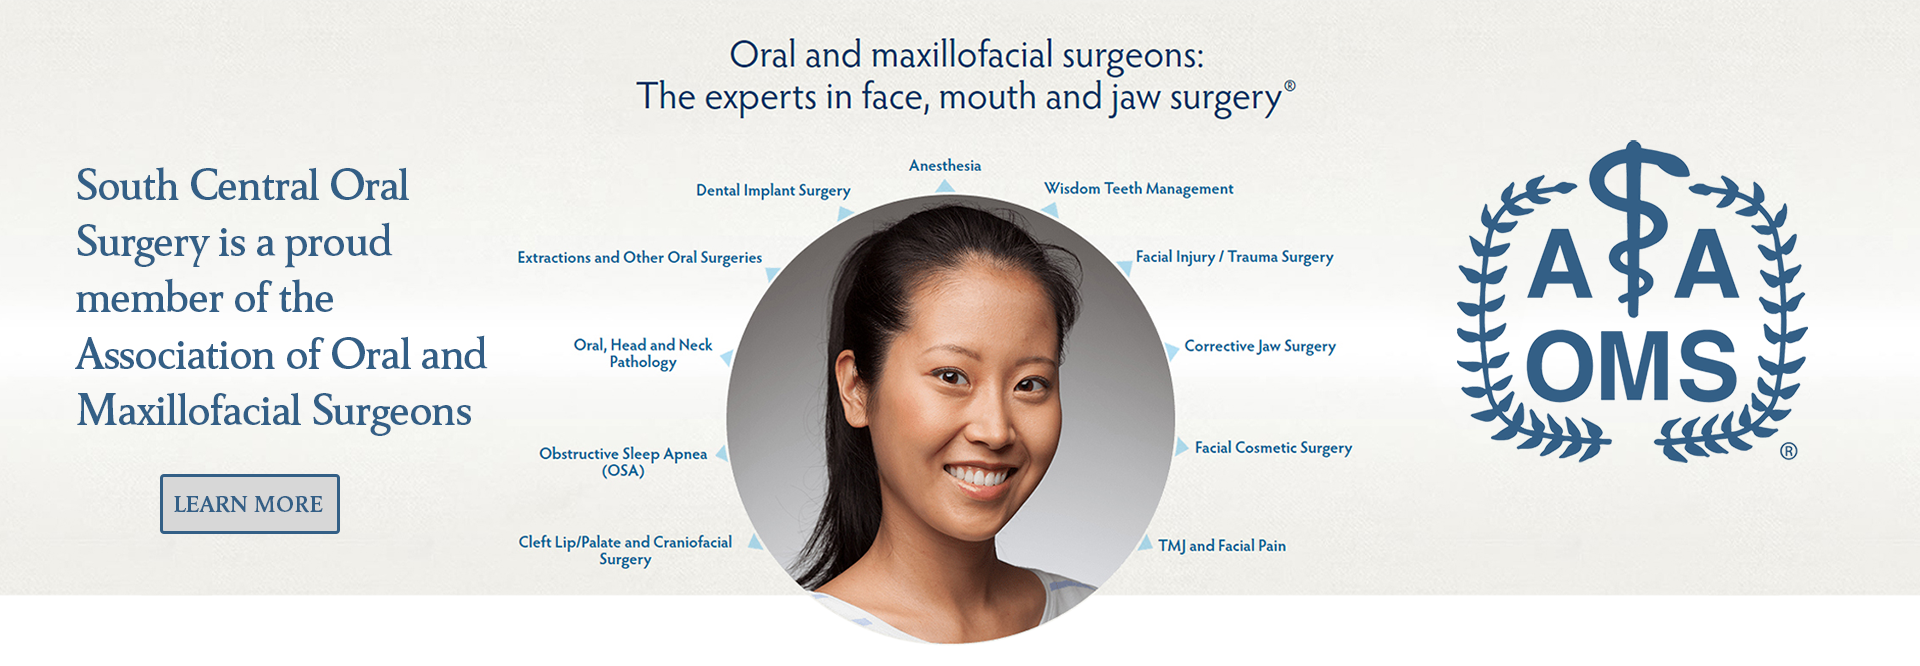 South Central Oral Surgery is a proud member of the Assocation of Oral Surgeons.